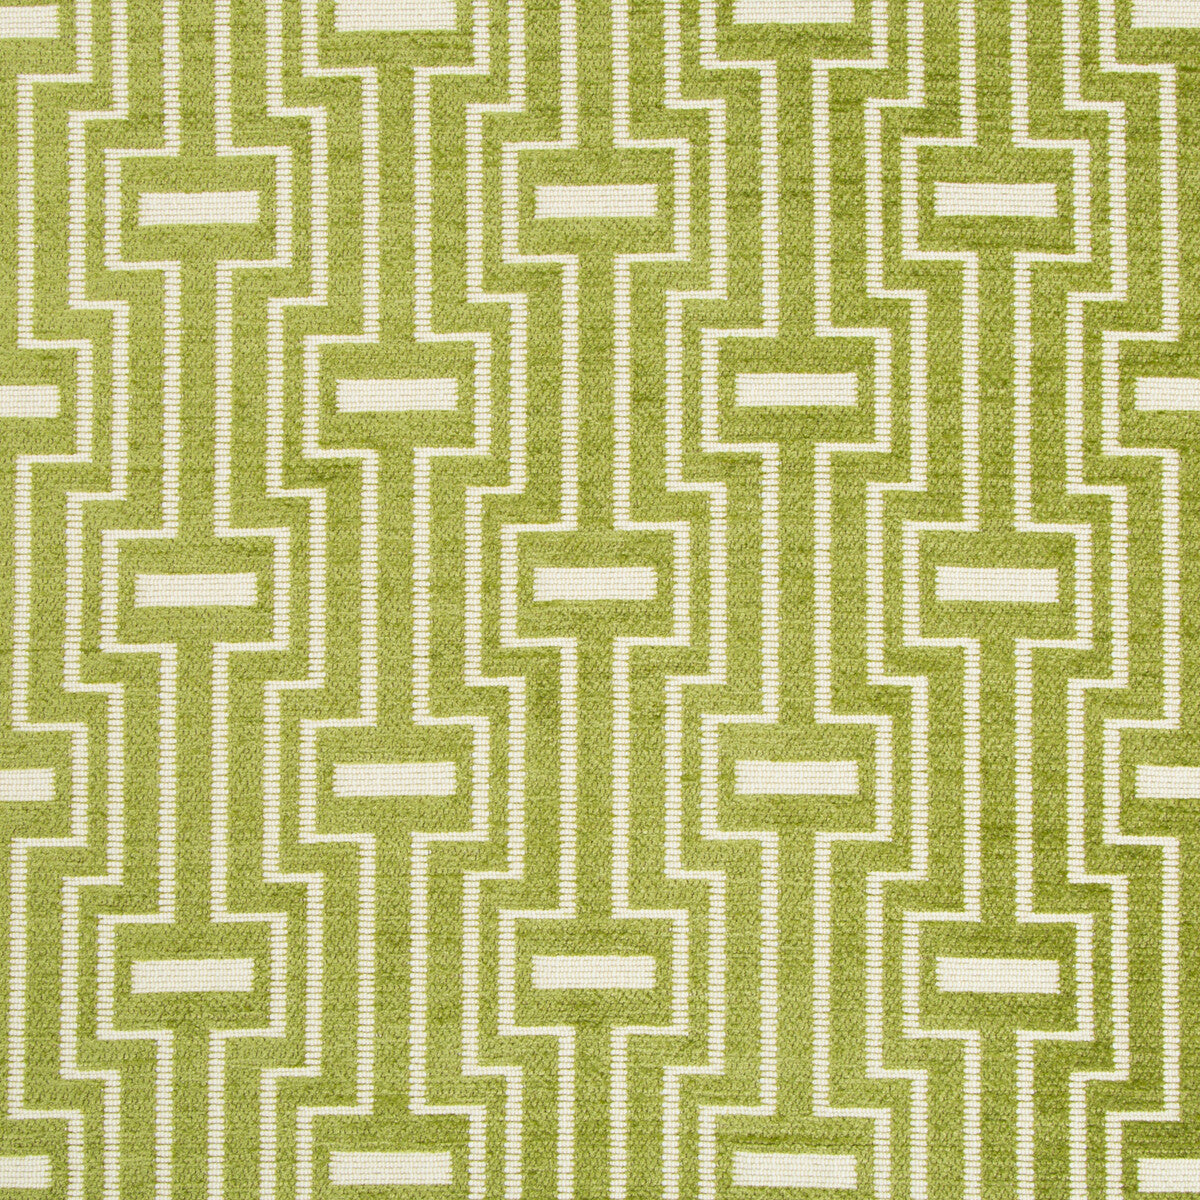 Kravet Contract fabric in 34753-3 color - pattern 34753.3.0 - by Kravet Contract